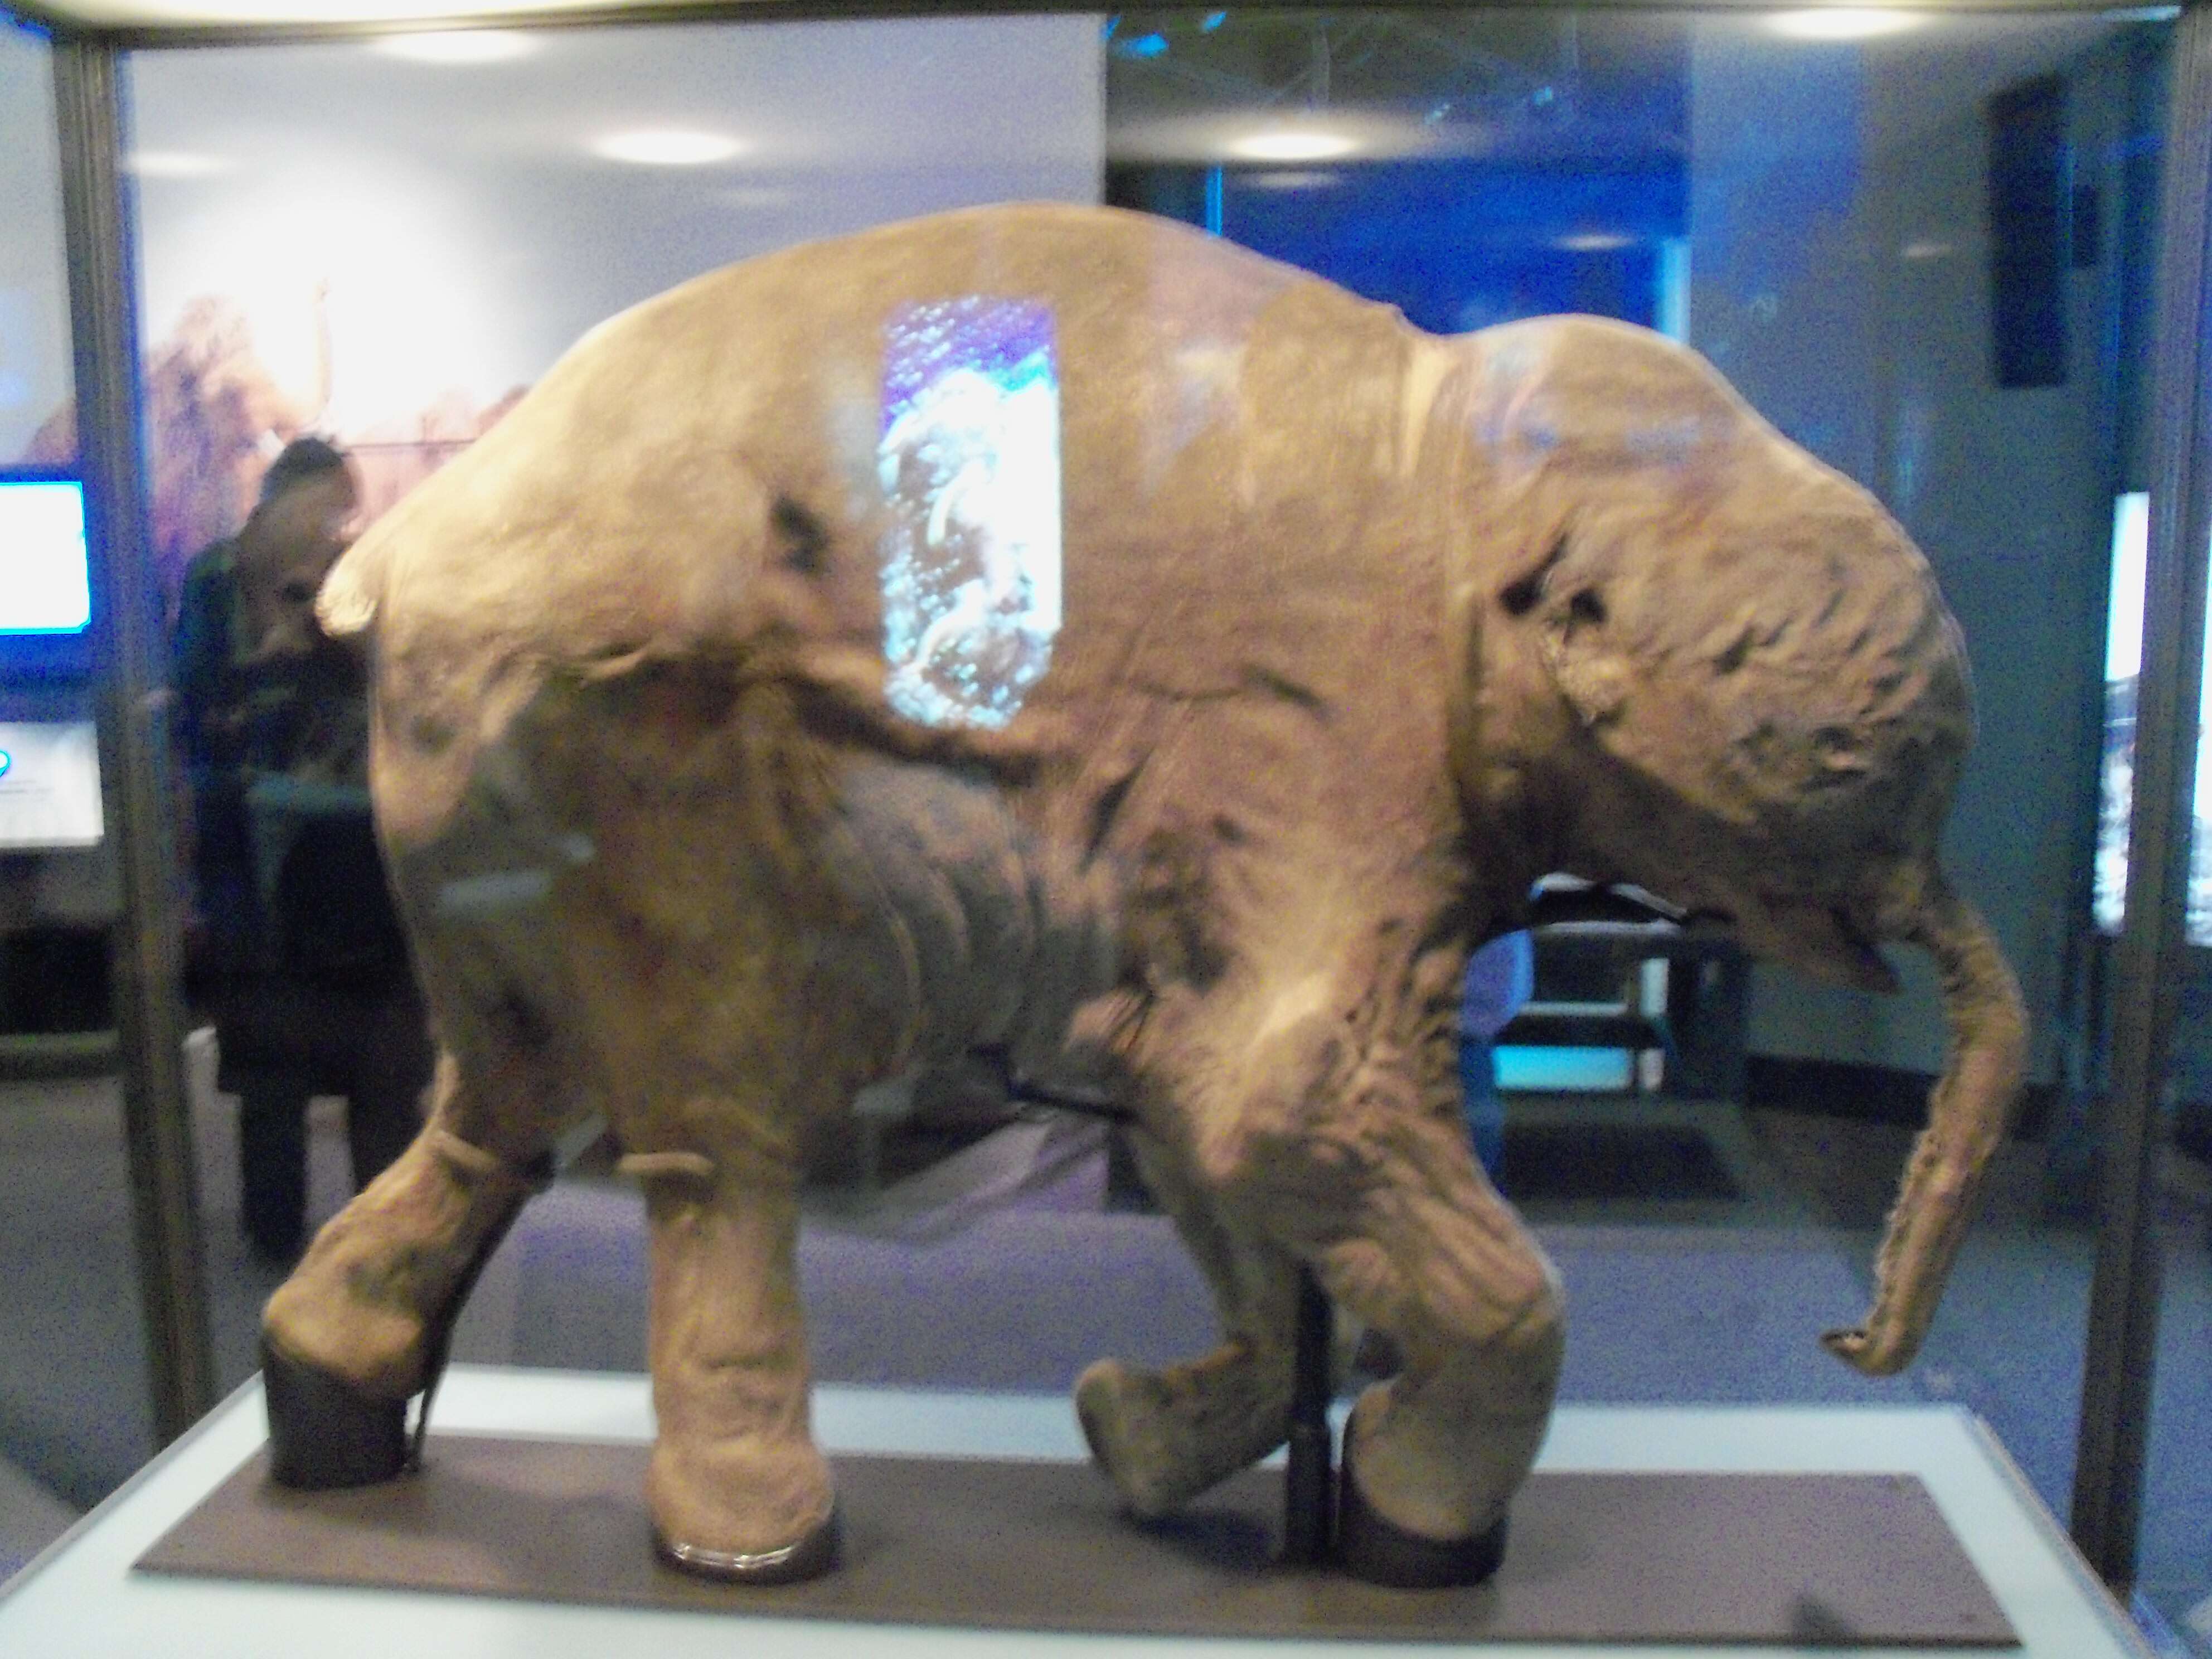 Image of wooly mammoth